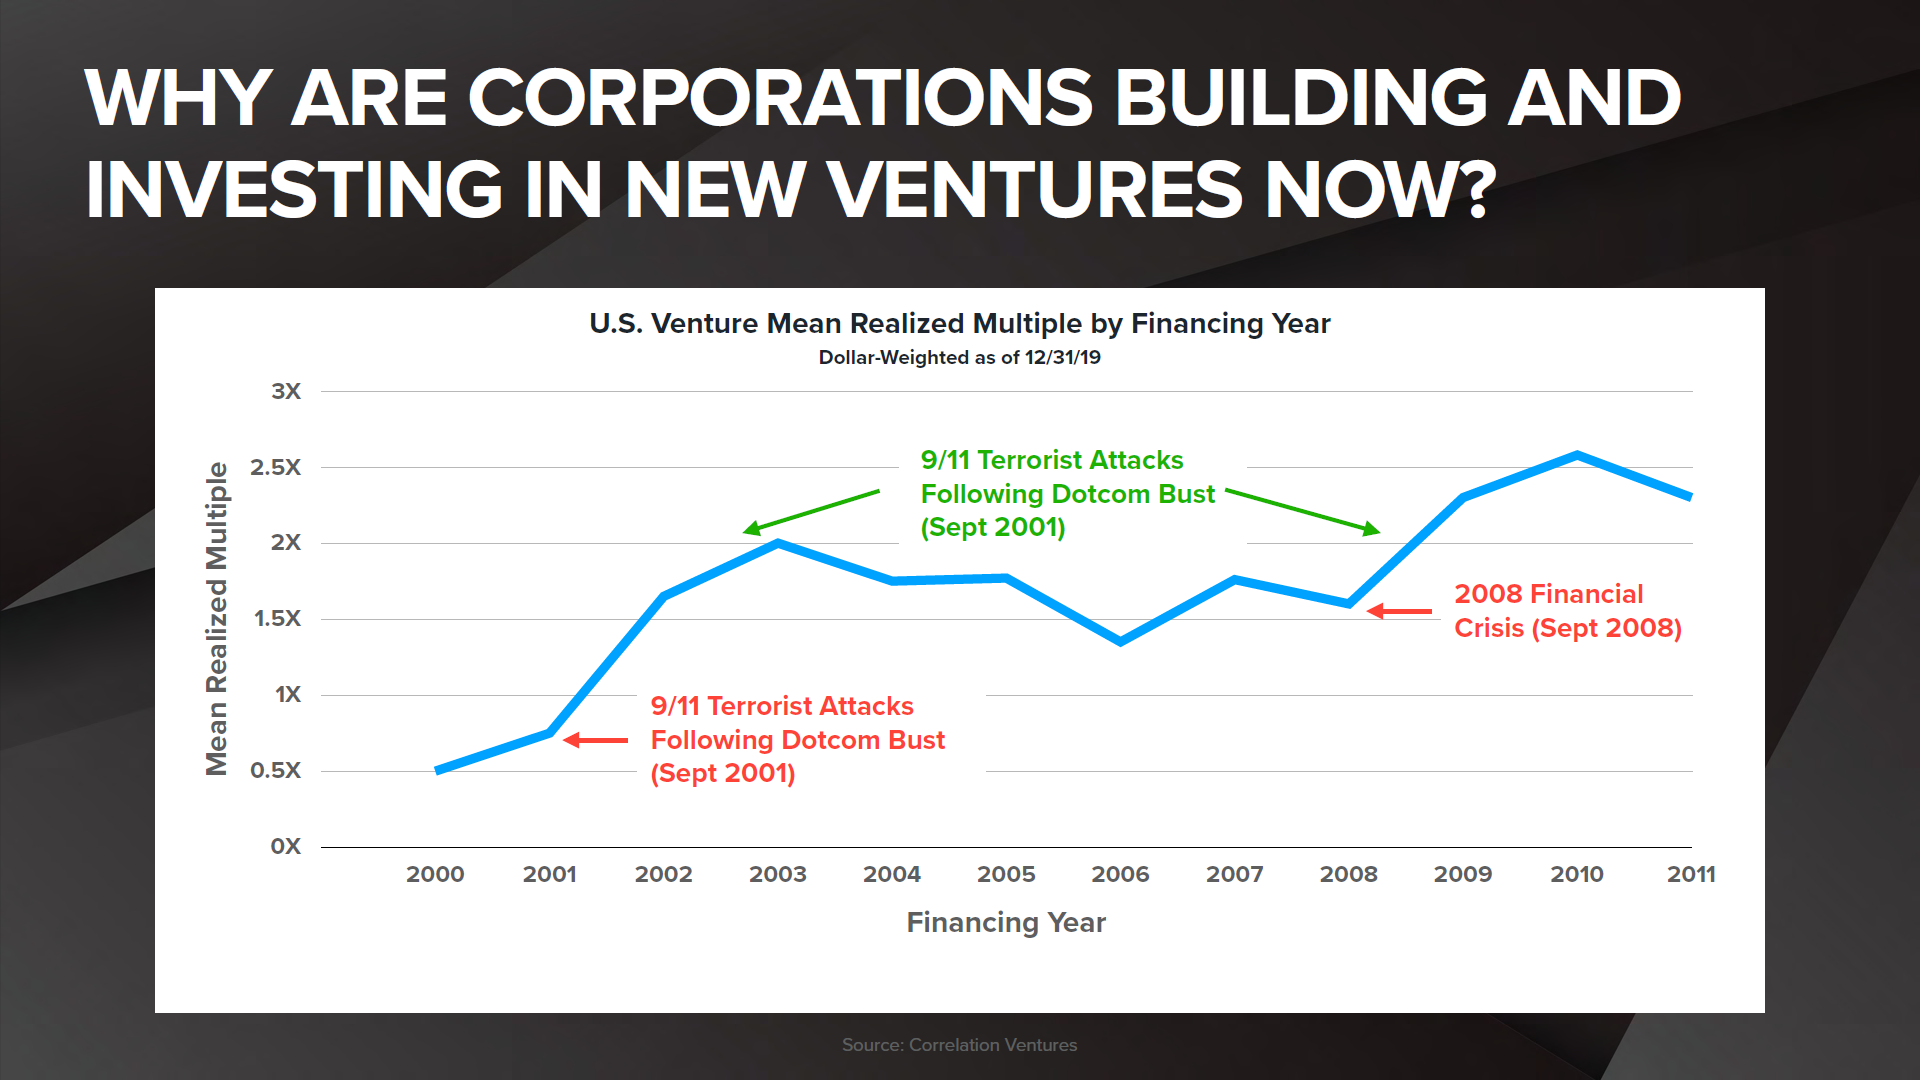 Why are Corporations Building and Investing in New Venture Now?